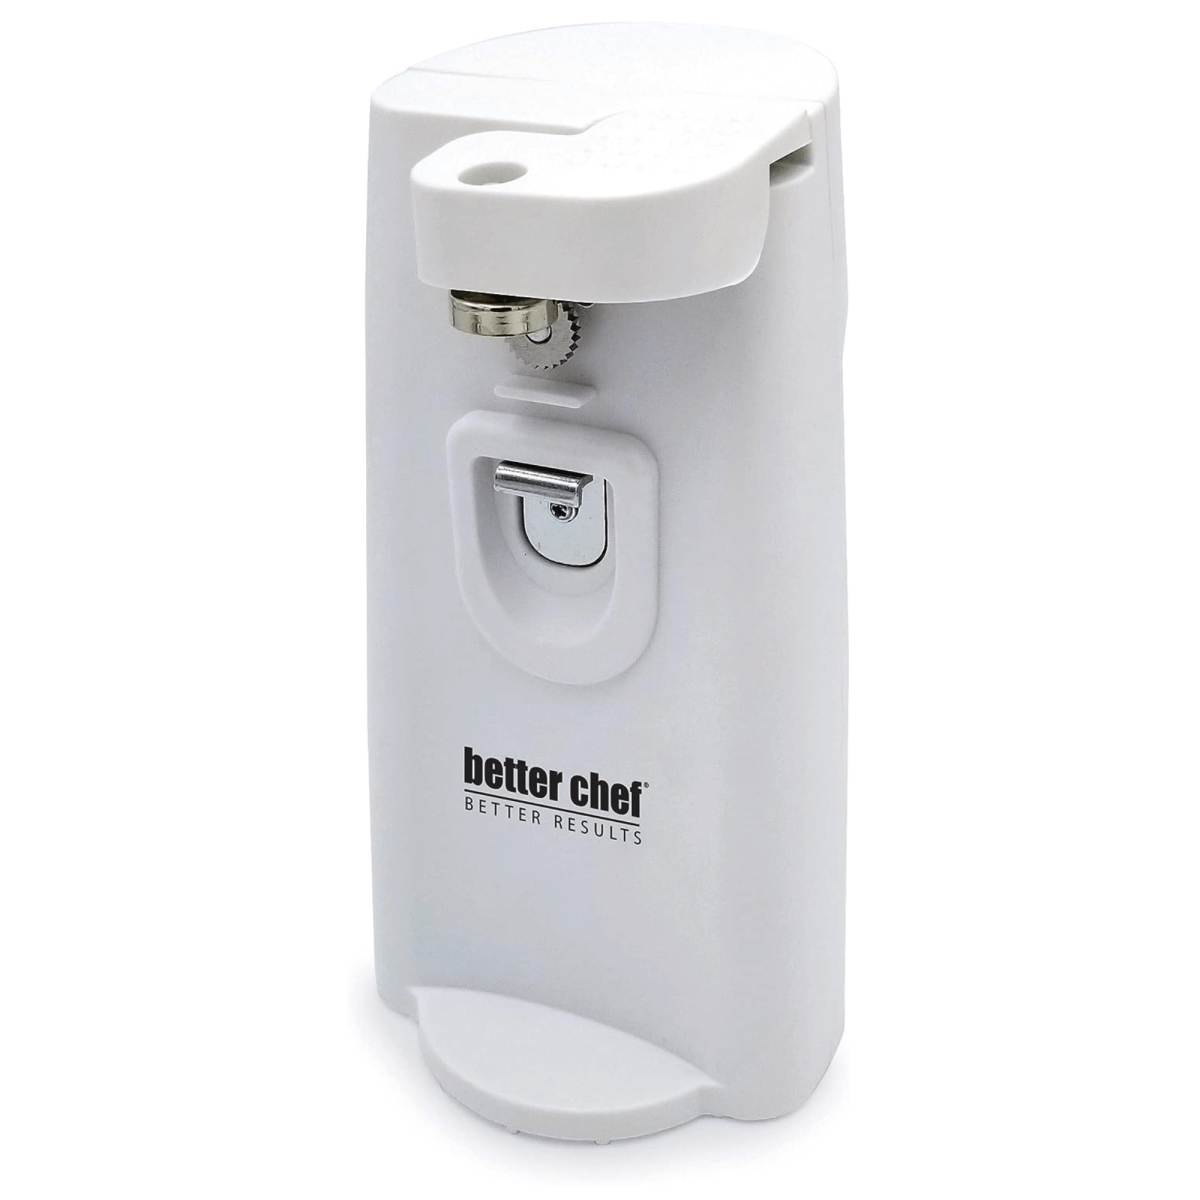 Picture of Better Chef IM-838W-CAN-CP Better Chef Deluxe Tall 3-in-1 Electric Can Opener - White